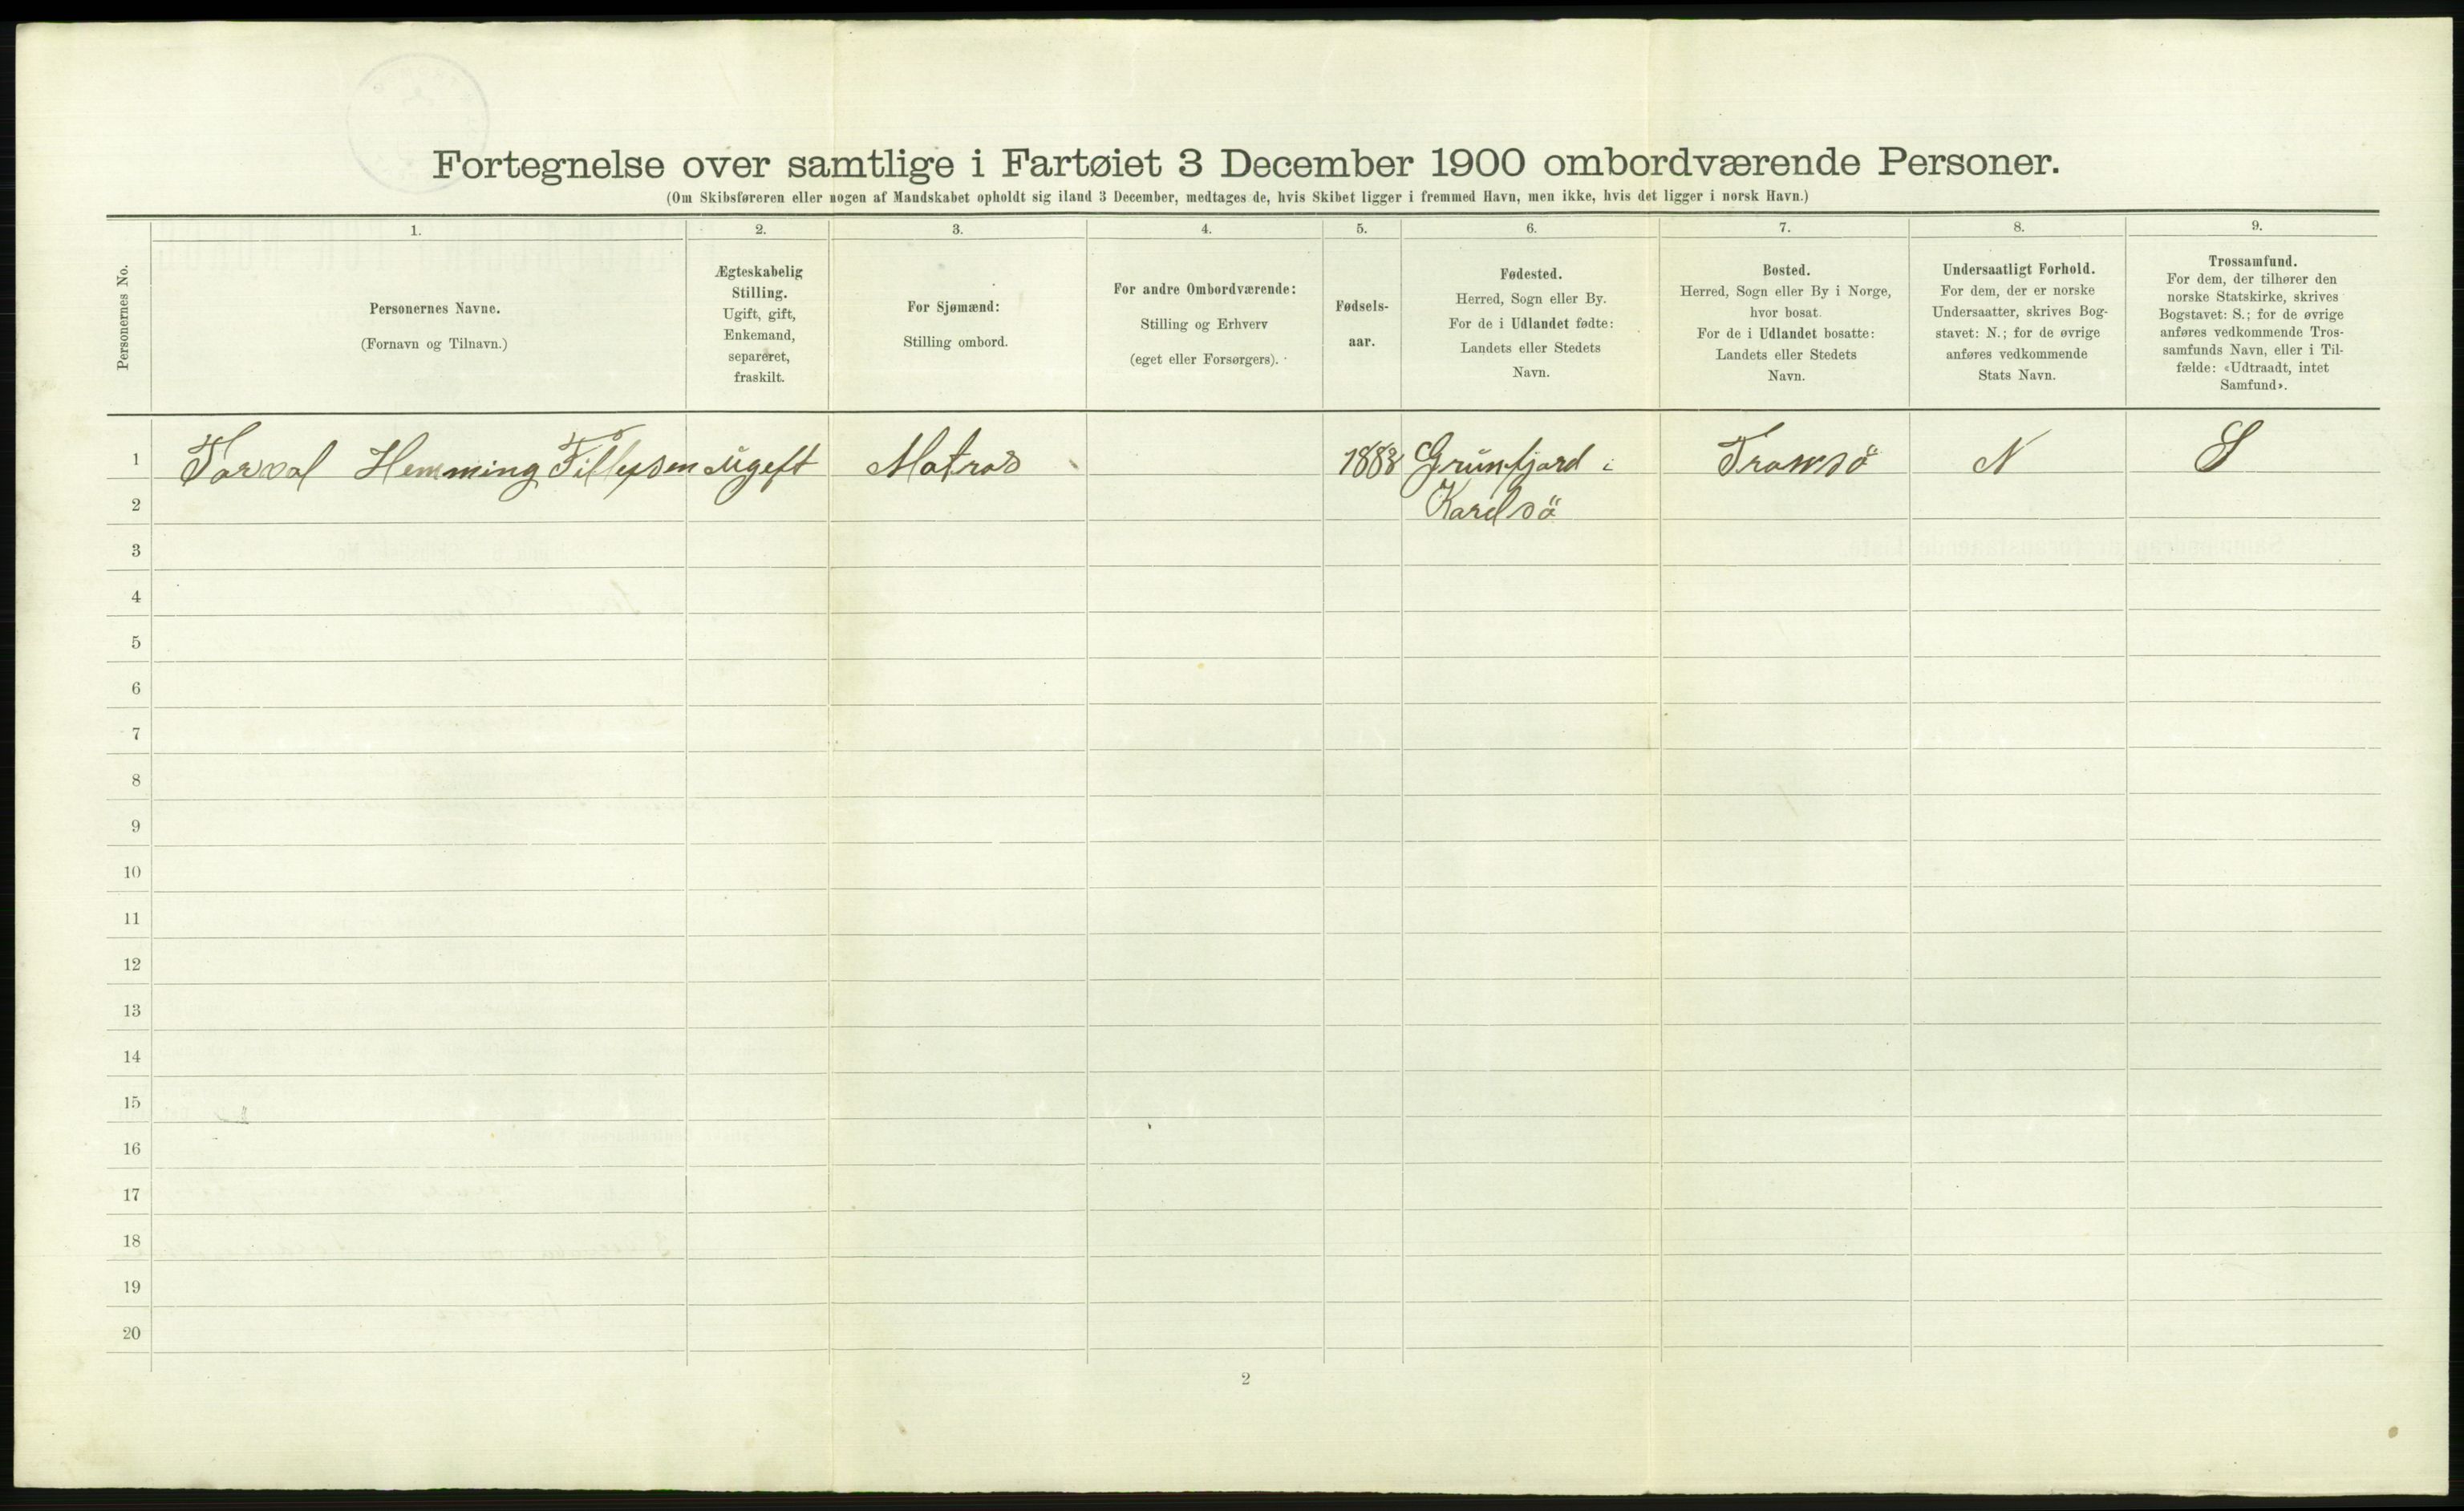 RA, 1900 Census - ship lists from ships in Norwegian harbours, harbours abroad and at sea, 1900, p. 2696